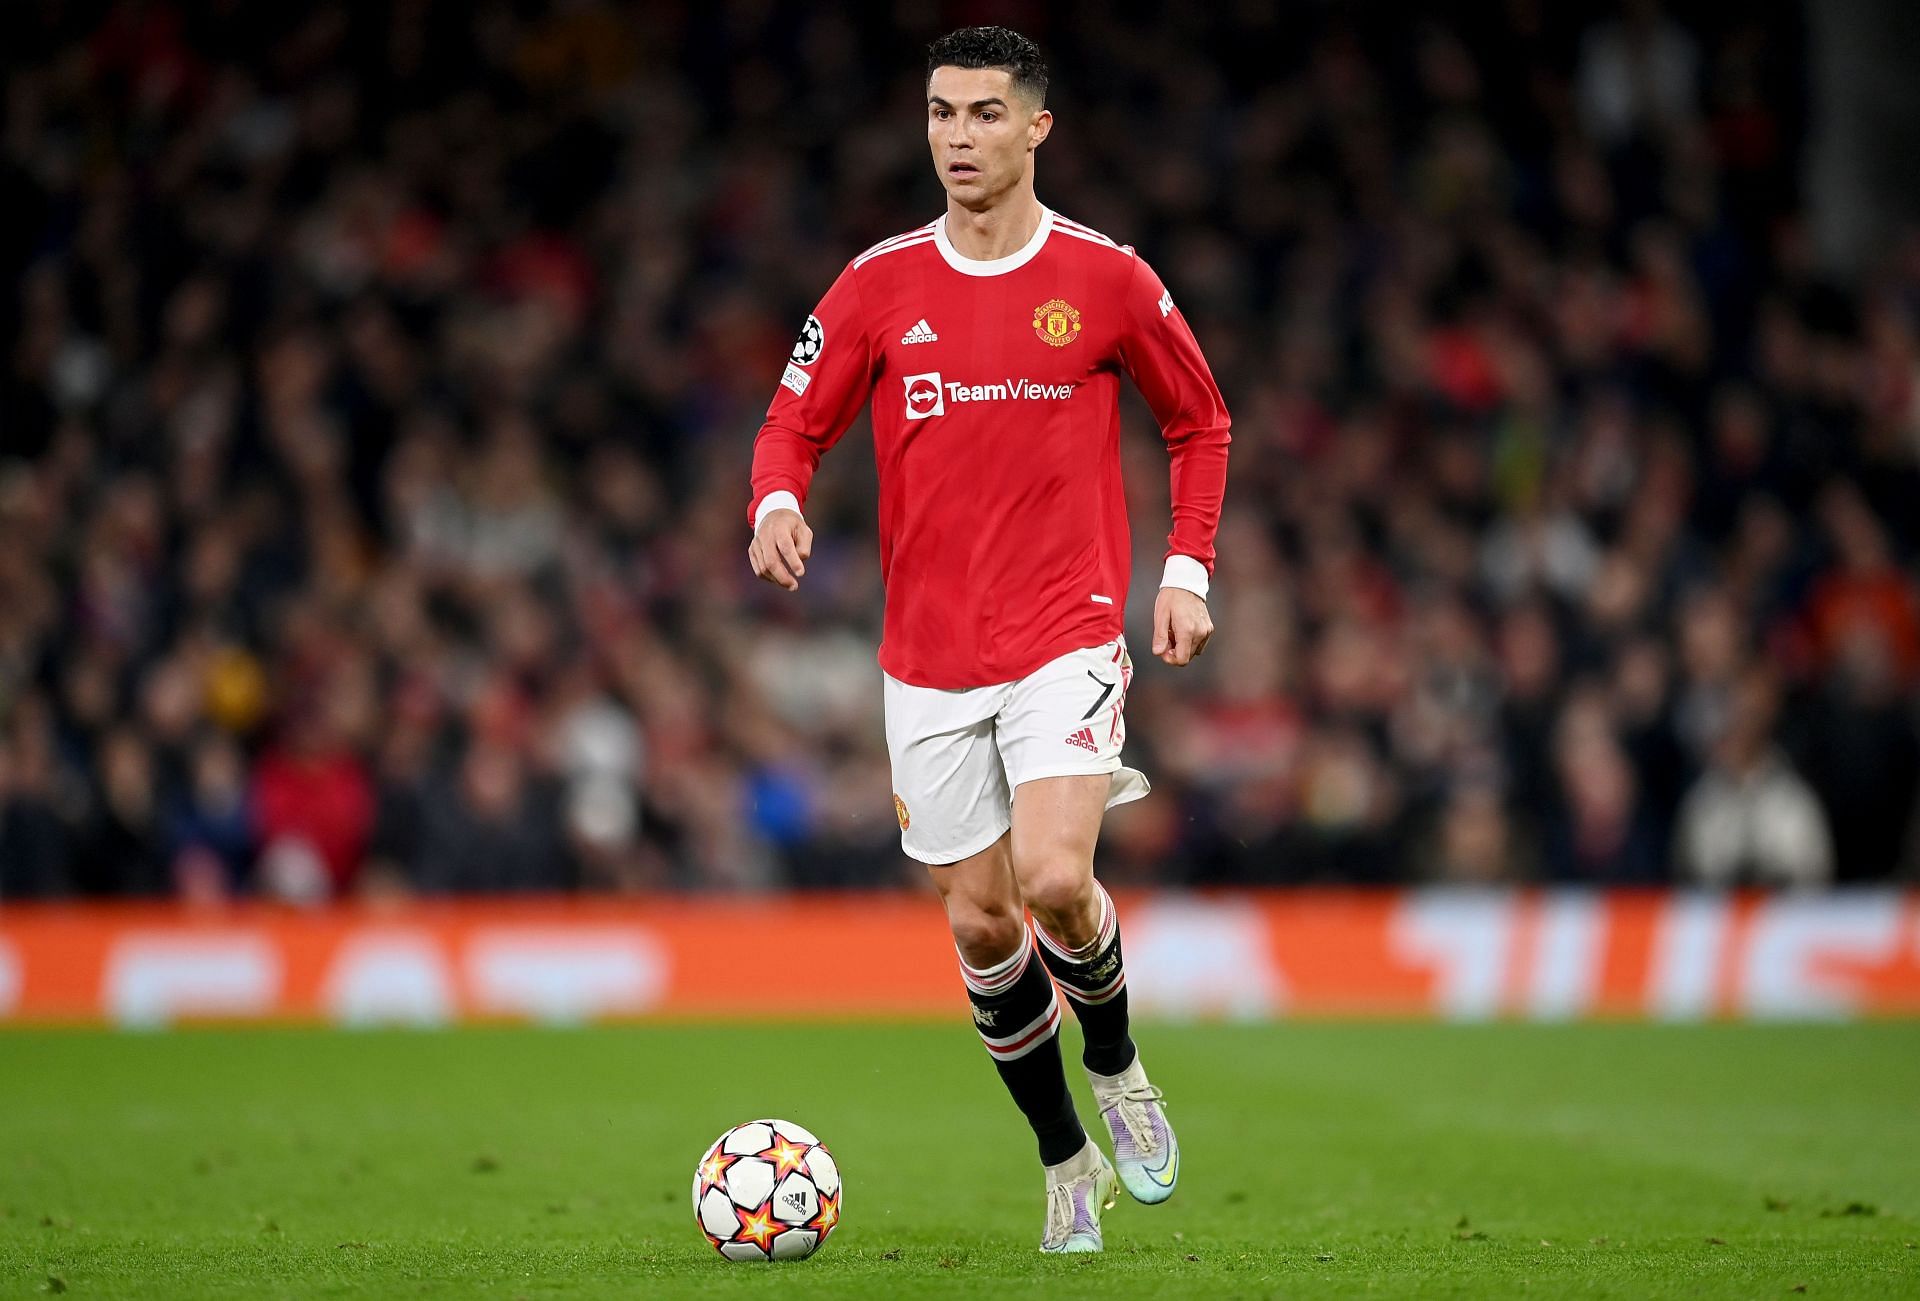 Cristiano Ronaldo has endured a difficult time at Manchester United this season.